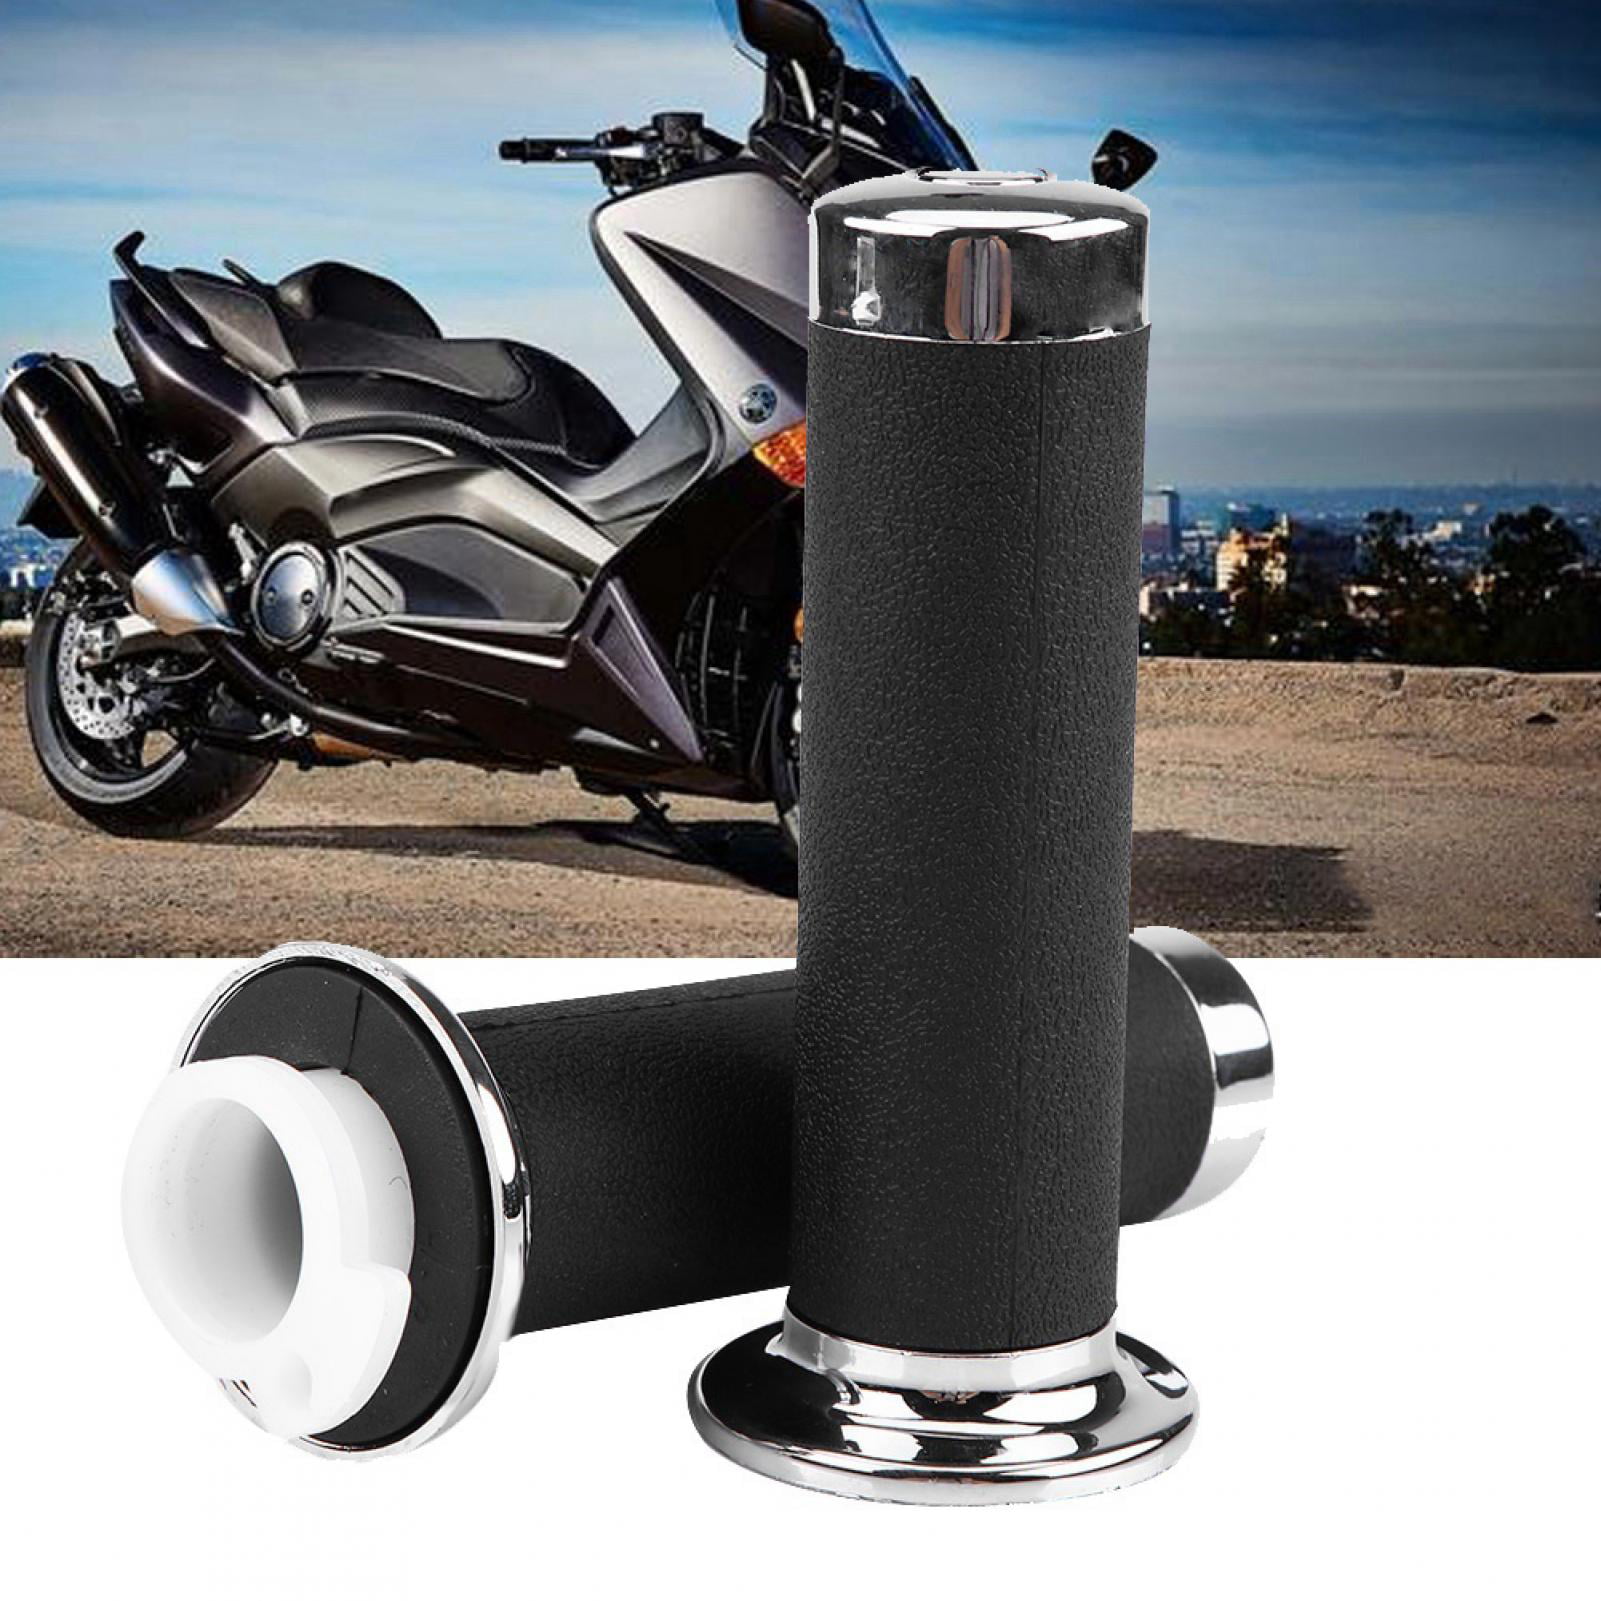 Details about   Custom NEW MOTORCYCLE HAND GRIPS FOR 7/8" 22mm HANDLEBAR SPORTS BIKES Chrome